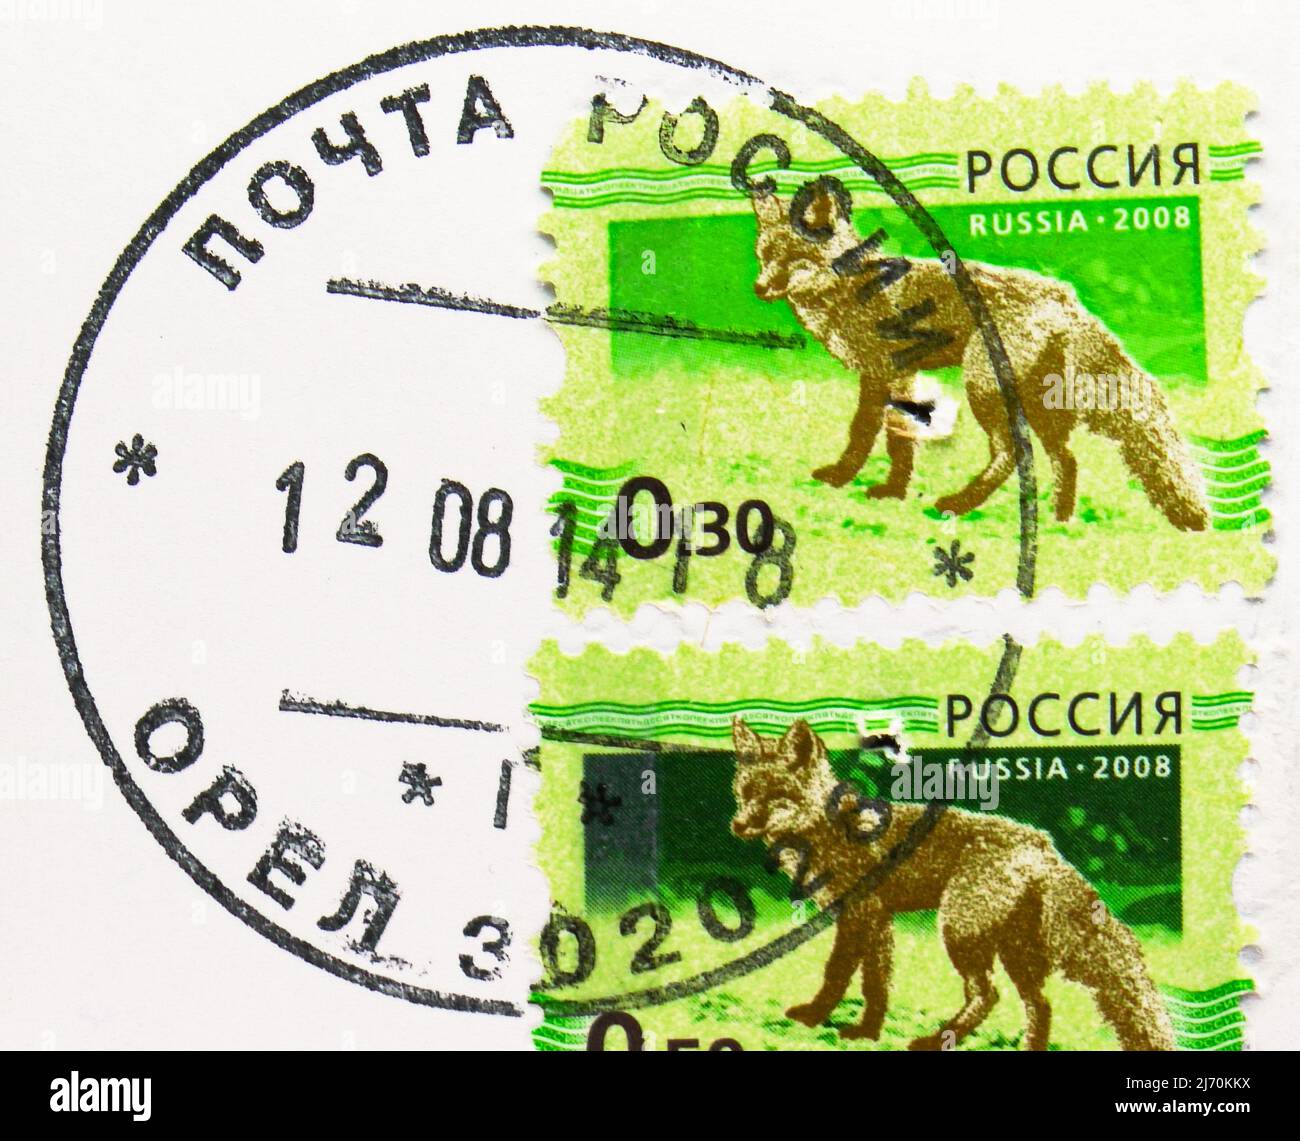 MOSCOW, RUSSIA - JUNE 10, 2021: Postage stamp printed in Russia of Oryol post office, dated 2014 Stock Photo